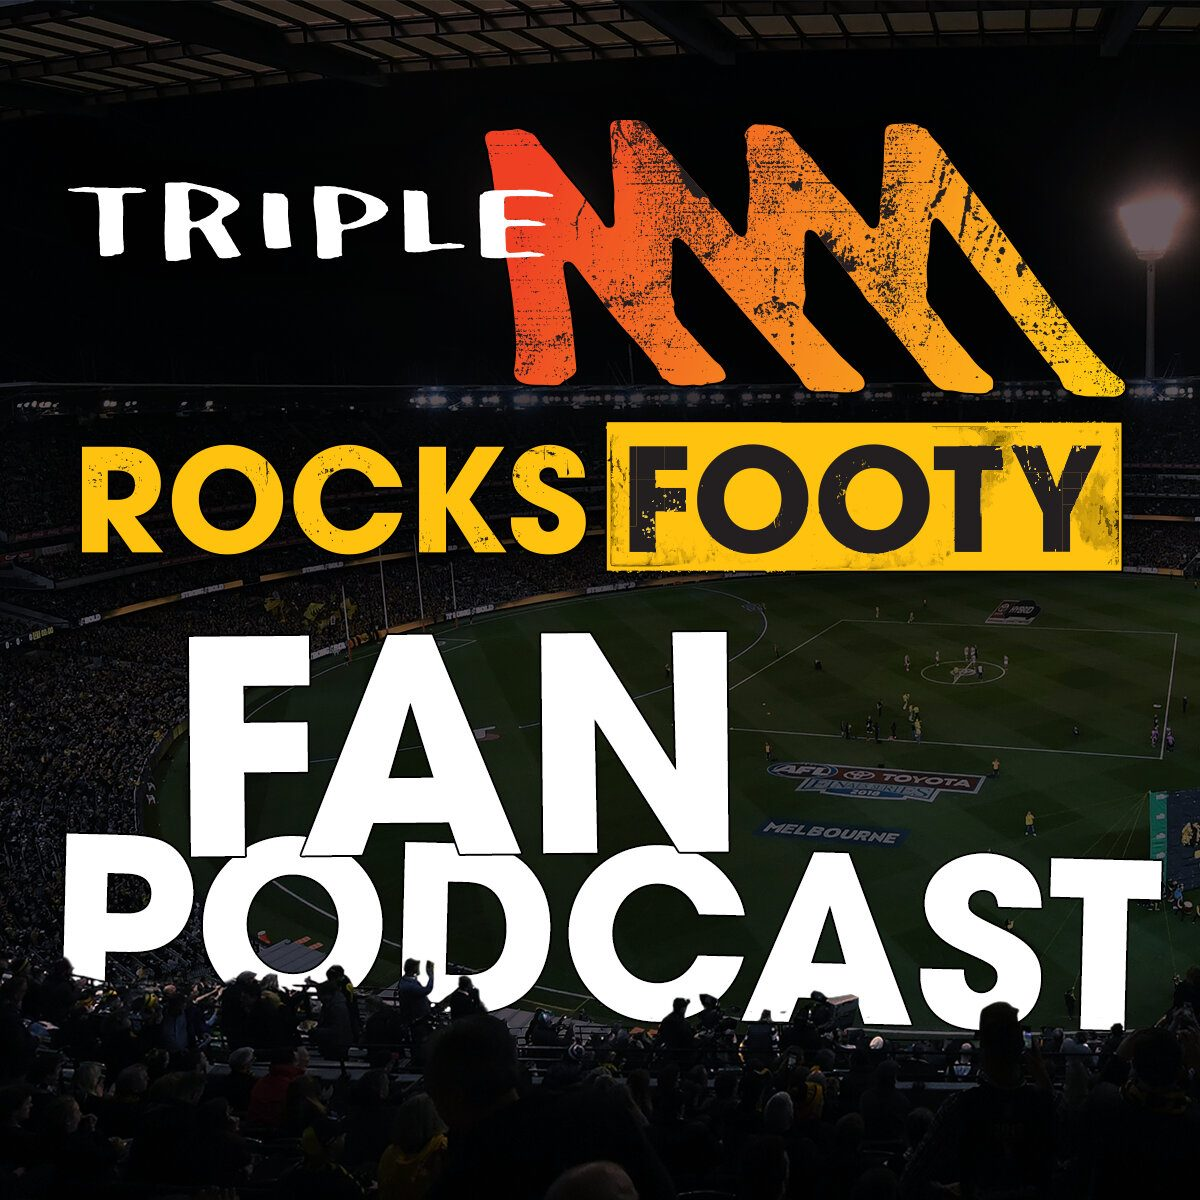 Triple M Footy Fan Podcast - Cult figures at each club from Adelaide to GWS, the pool at Metricon Stadium, Richmond tonking the Cats and Lachie Sholl's consolation prize